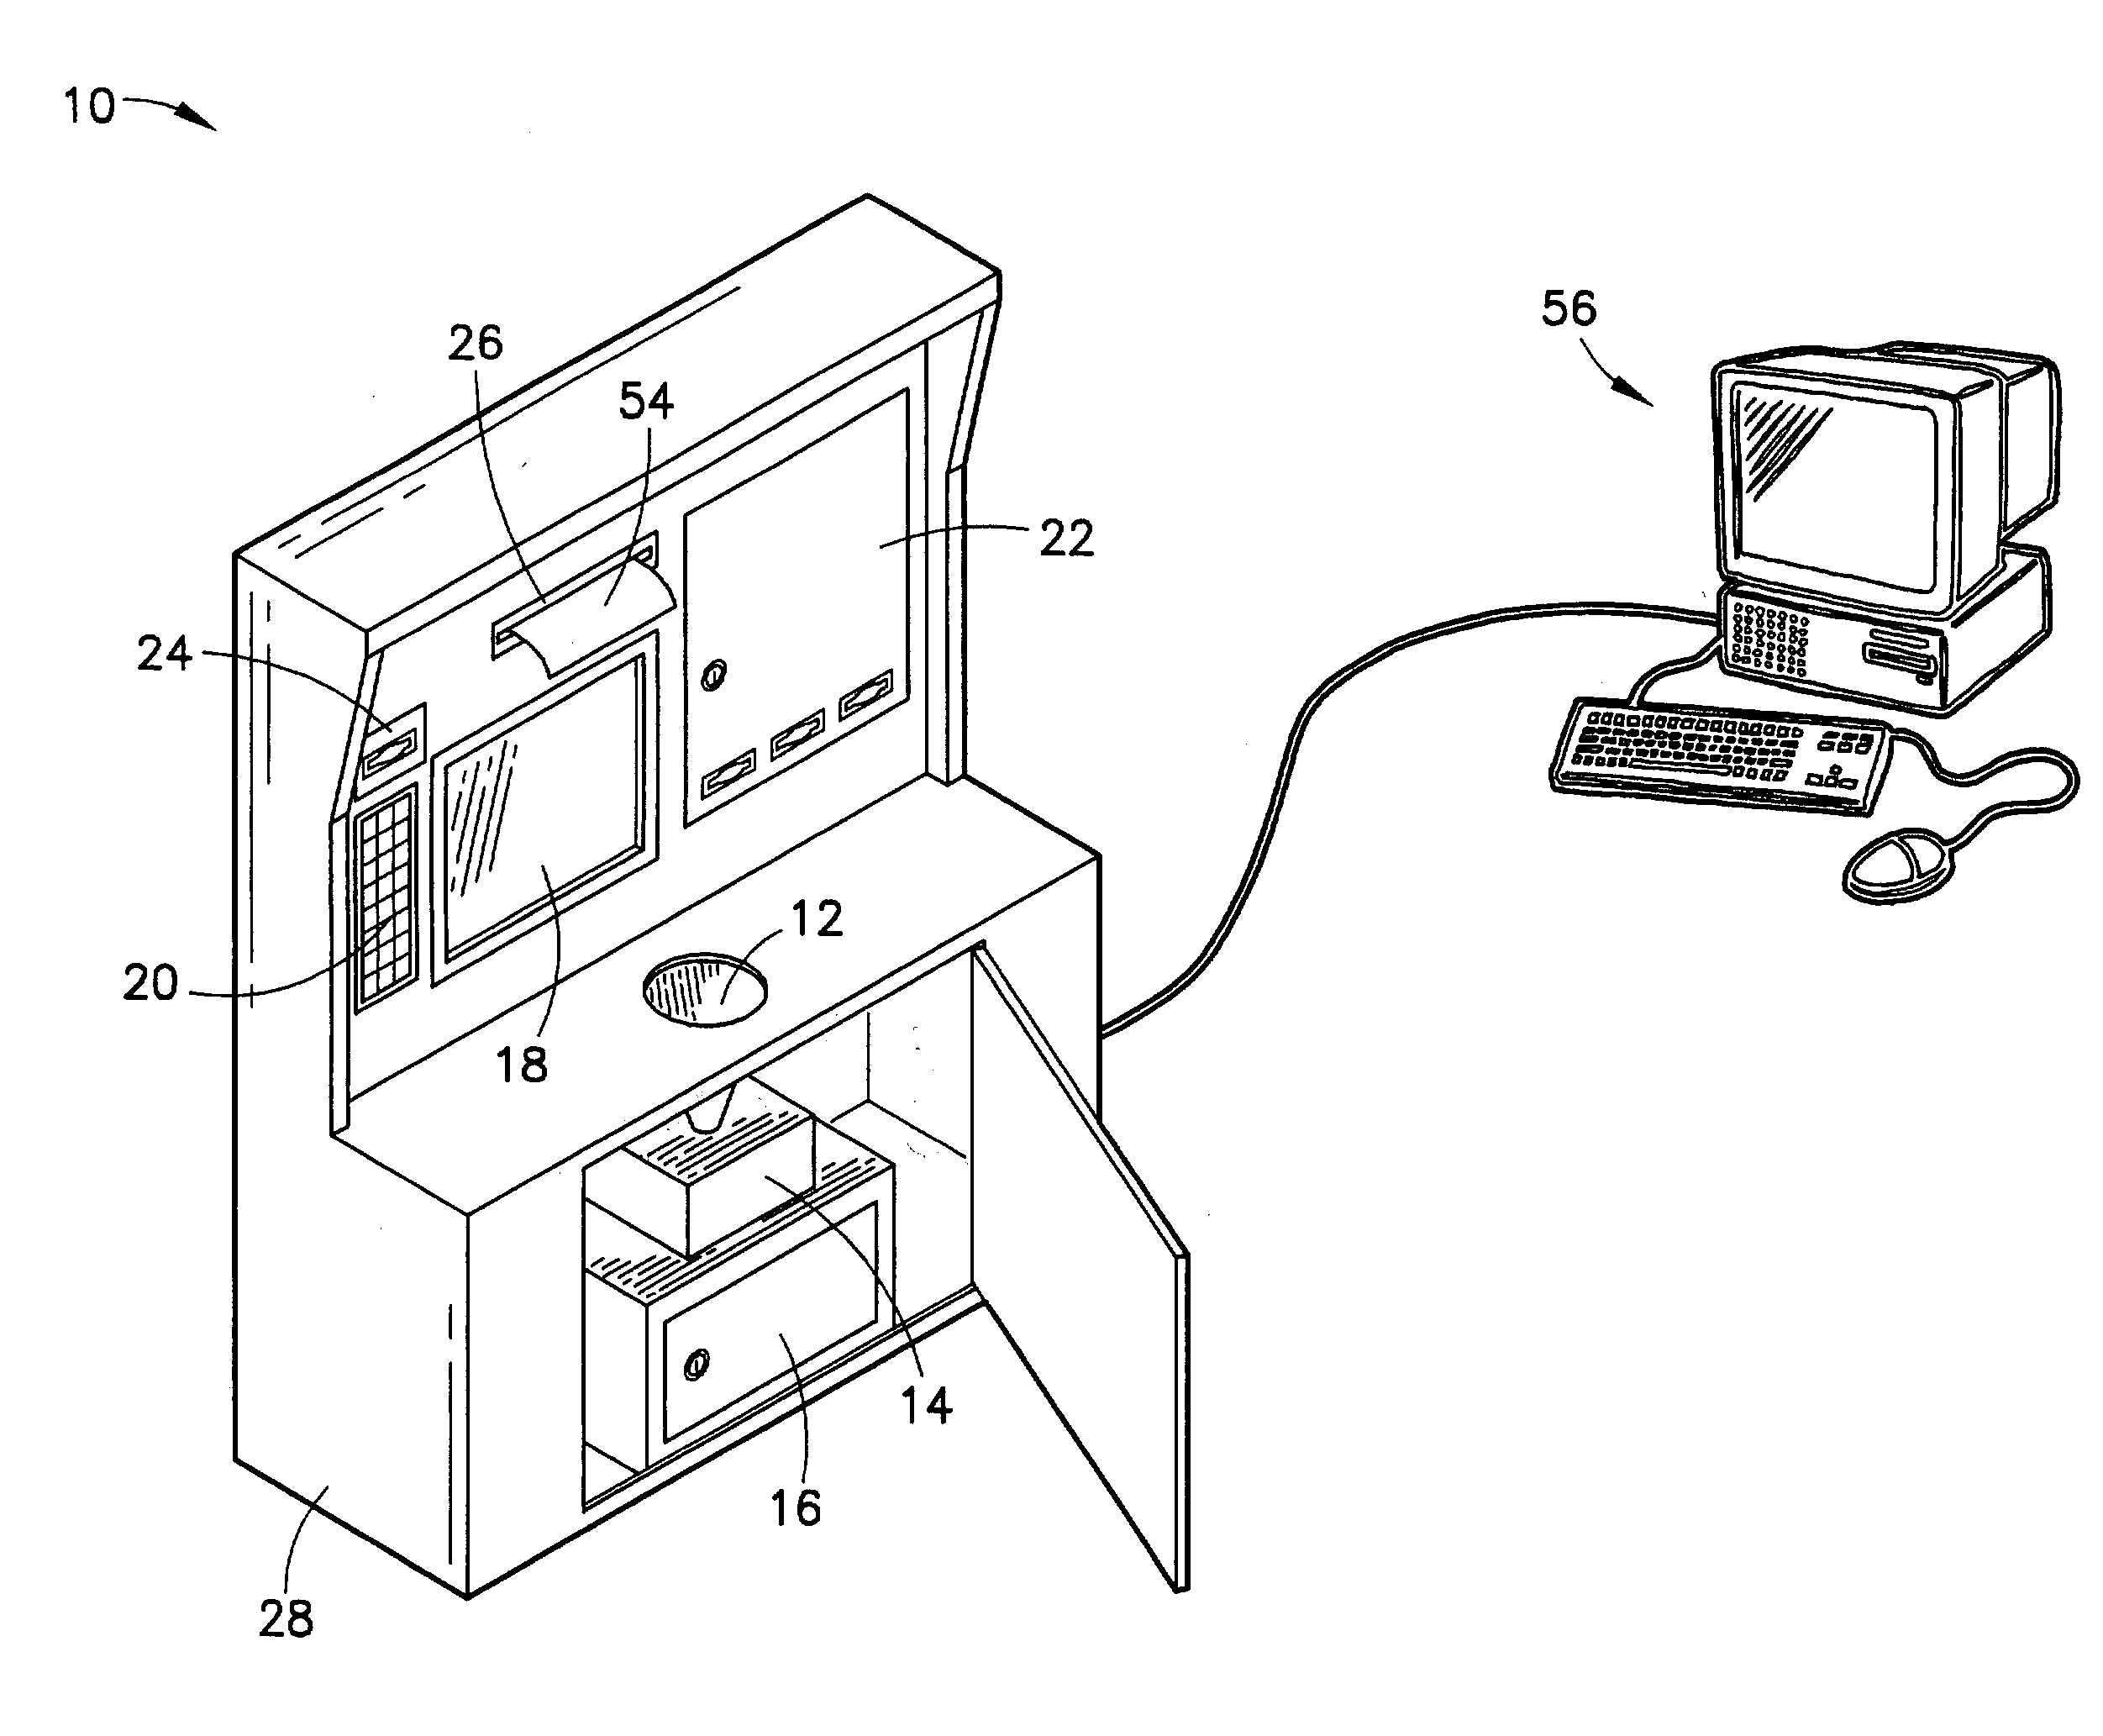 Method of exchanging coins involving non-cash exchange options